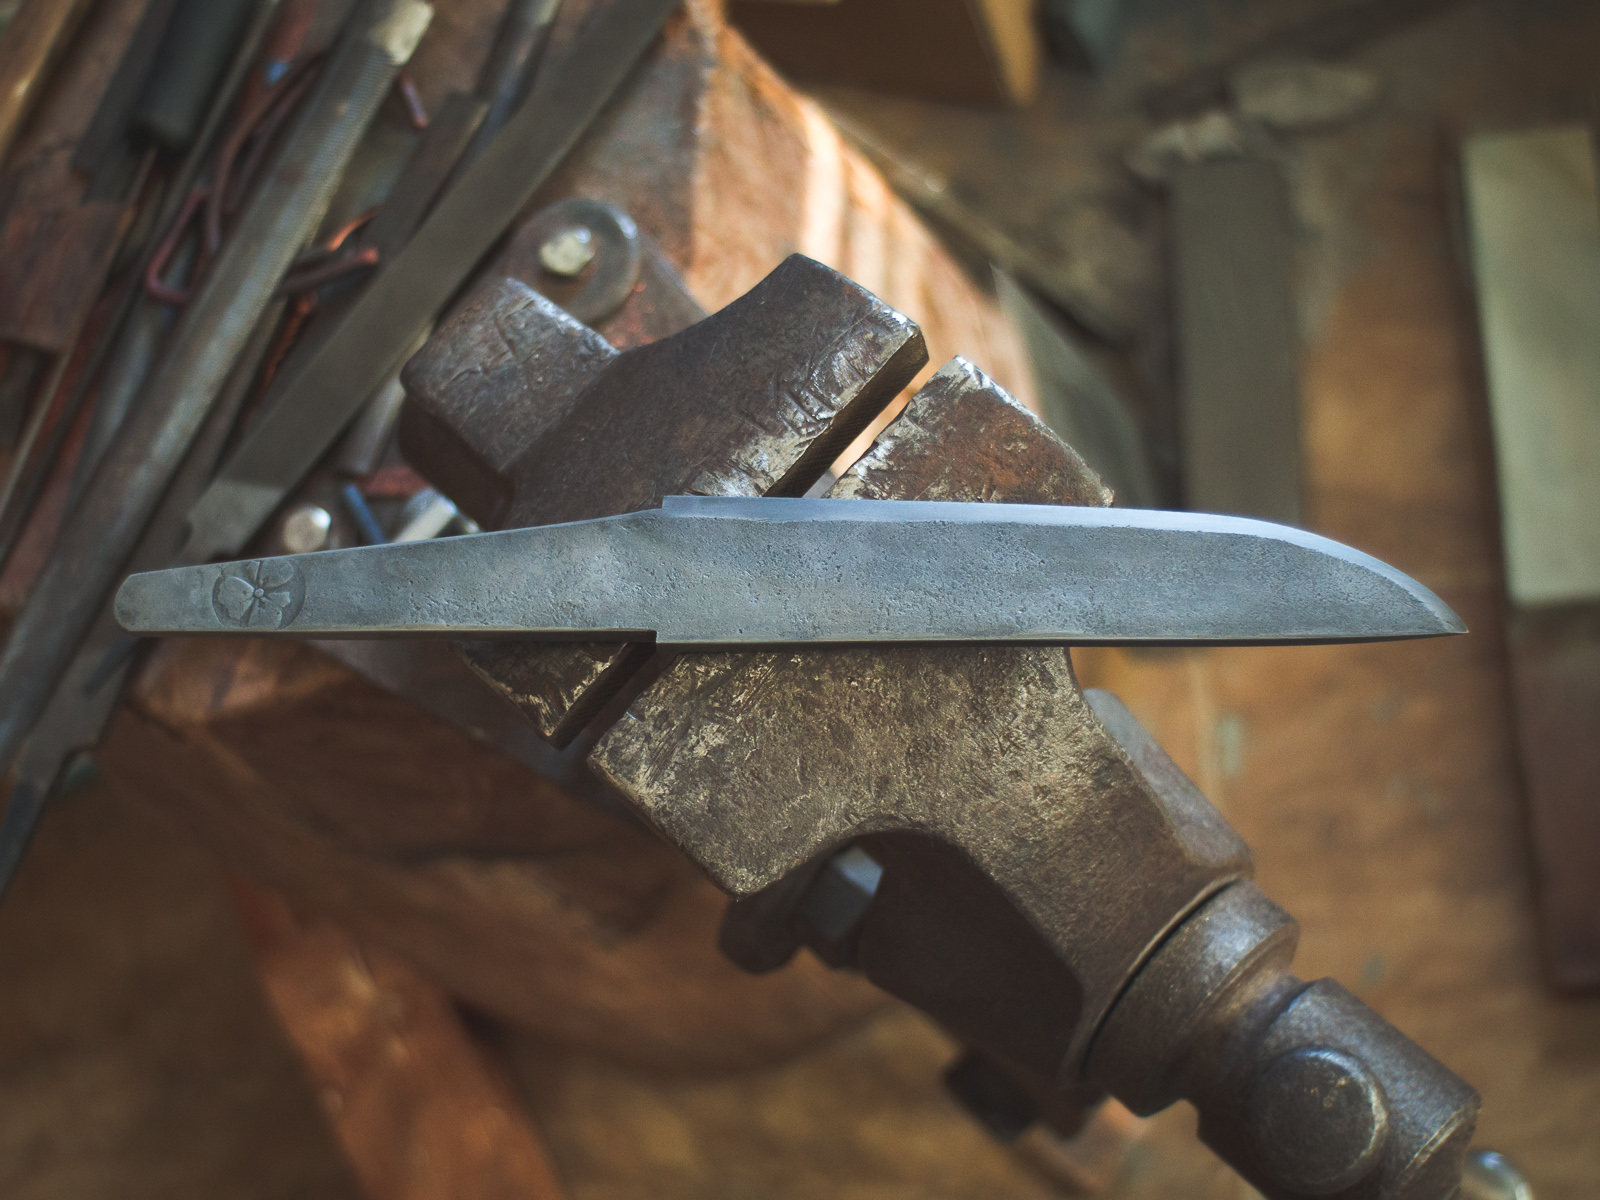 Island Blacksmith: Charcoal forged knives from reclaimed farm equipment.